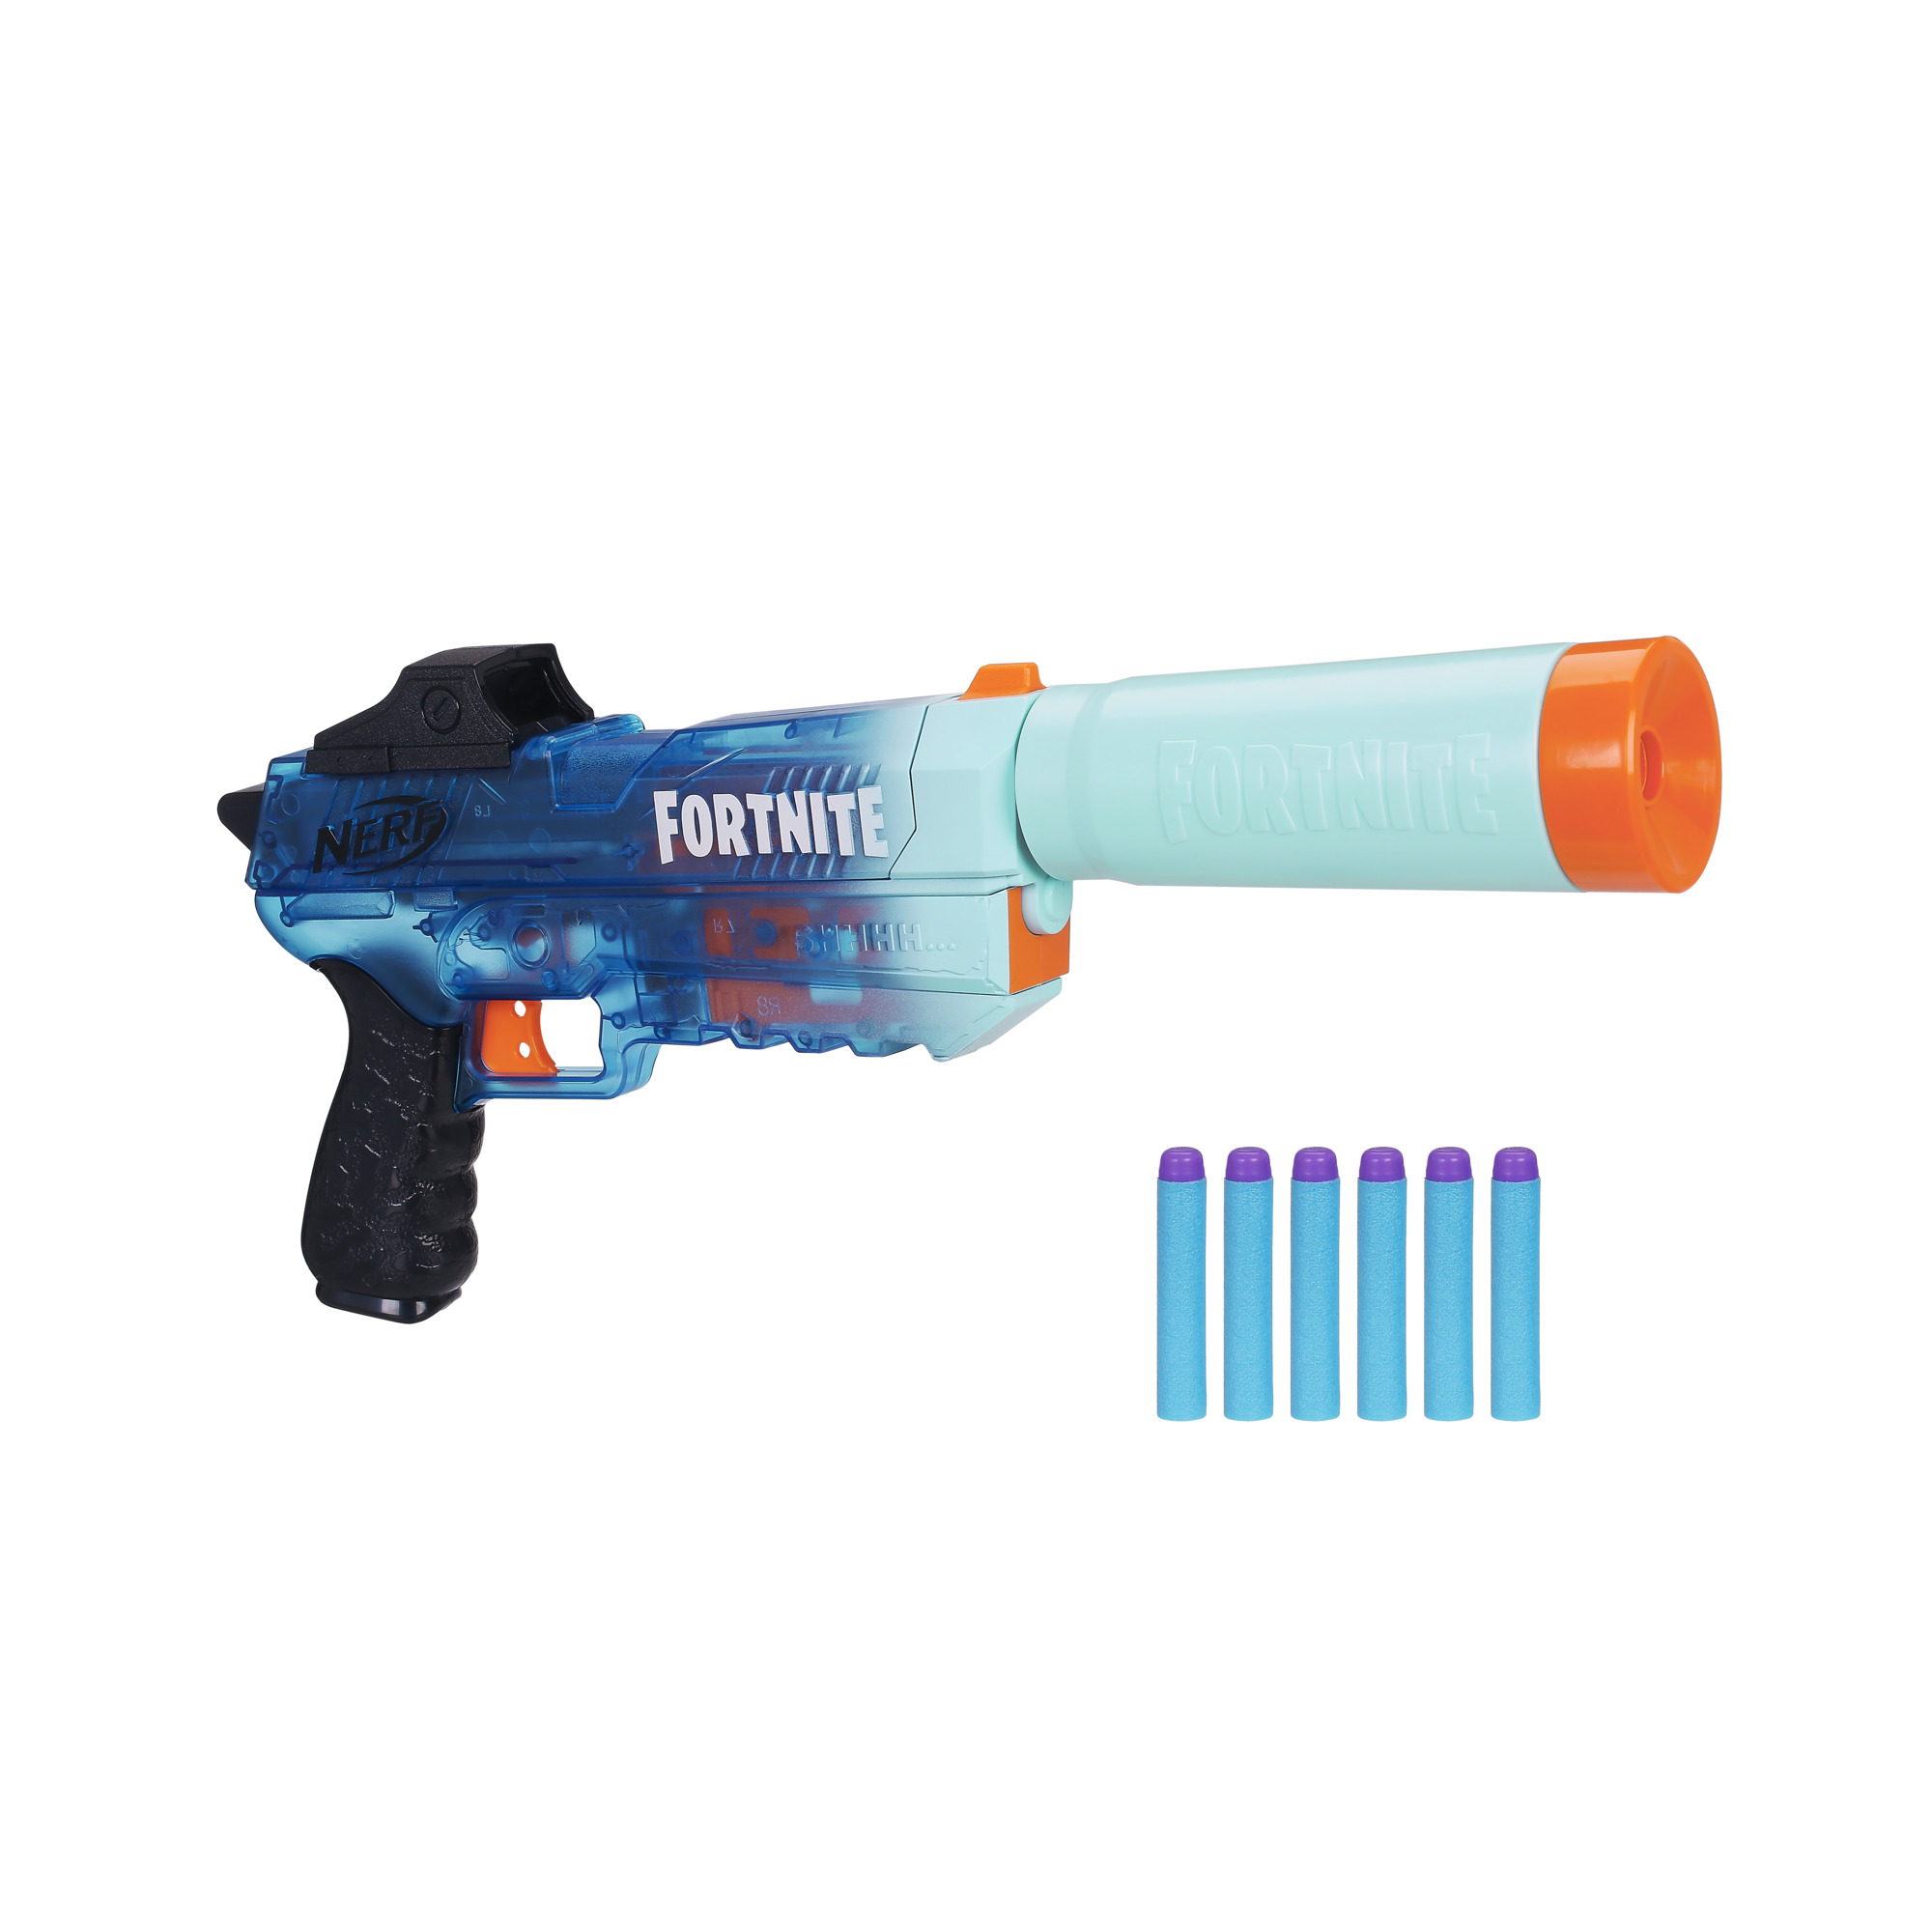 Nerf Fortnite SP-Rippley Blaster w/ Detachable Barrel and 6 Darts $10 + free shipping w/ Walmart+ or on orders over $35